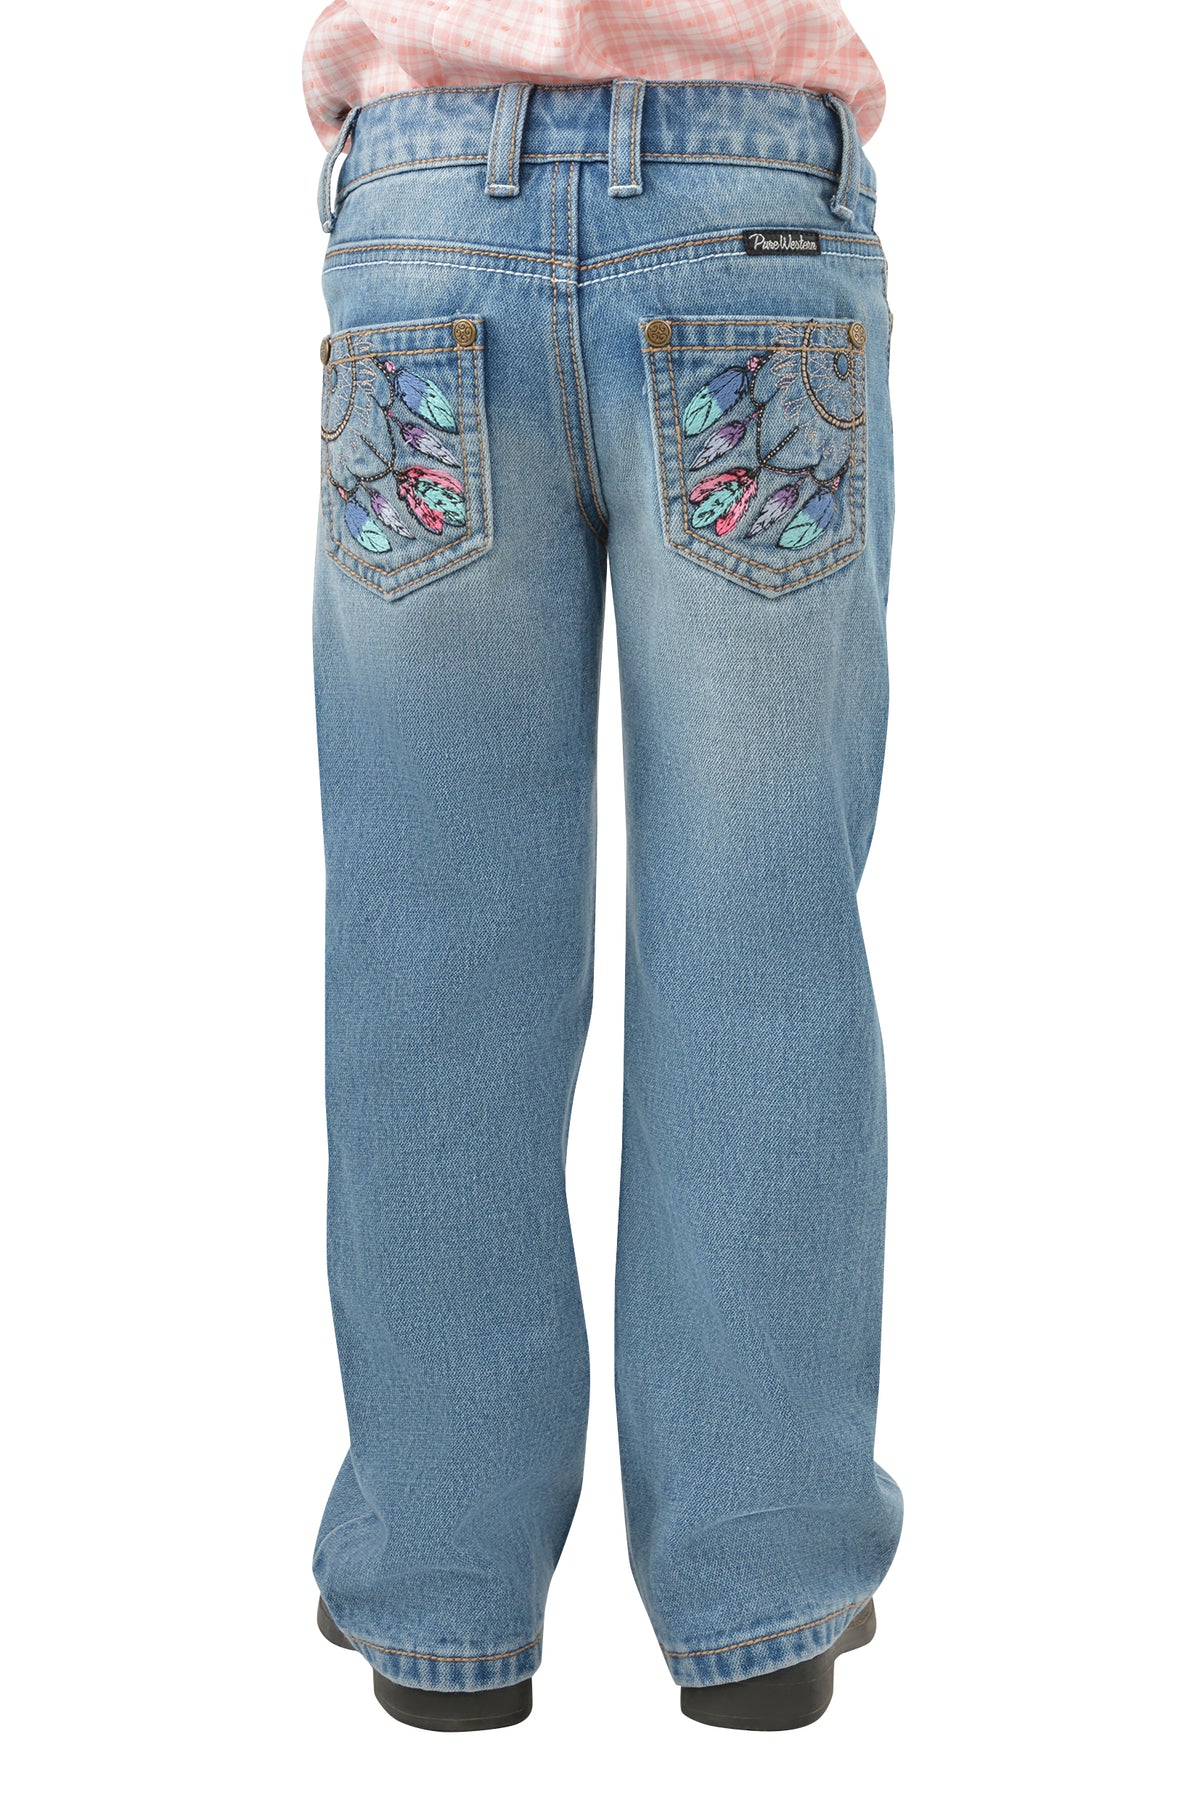 Pure Western Girls Sunny Boot Cut Jean - Faded Blue